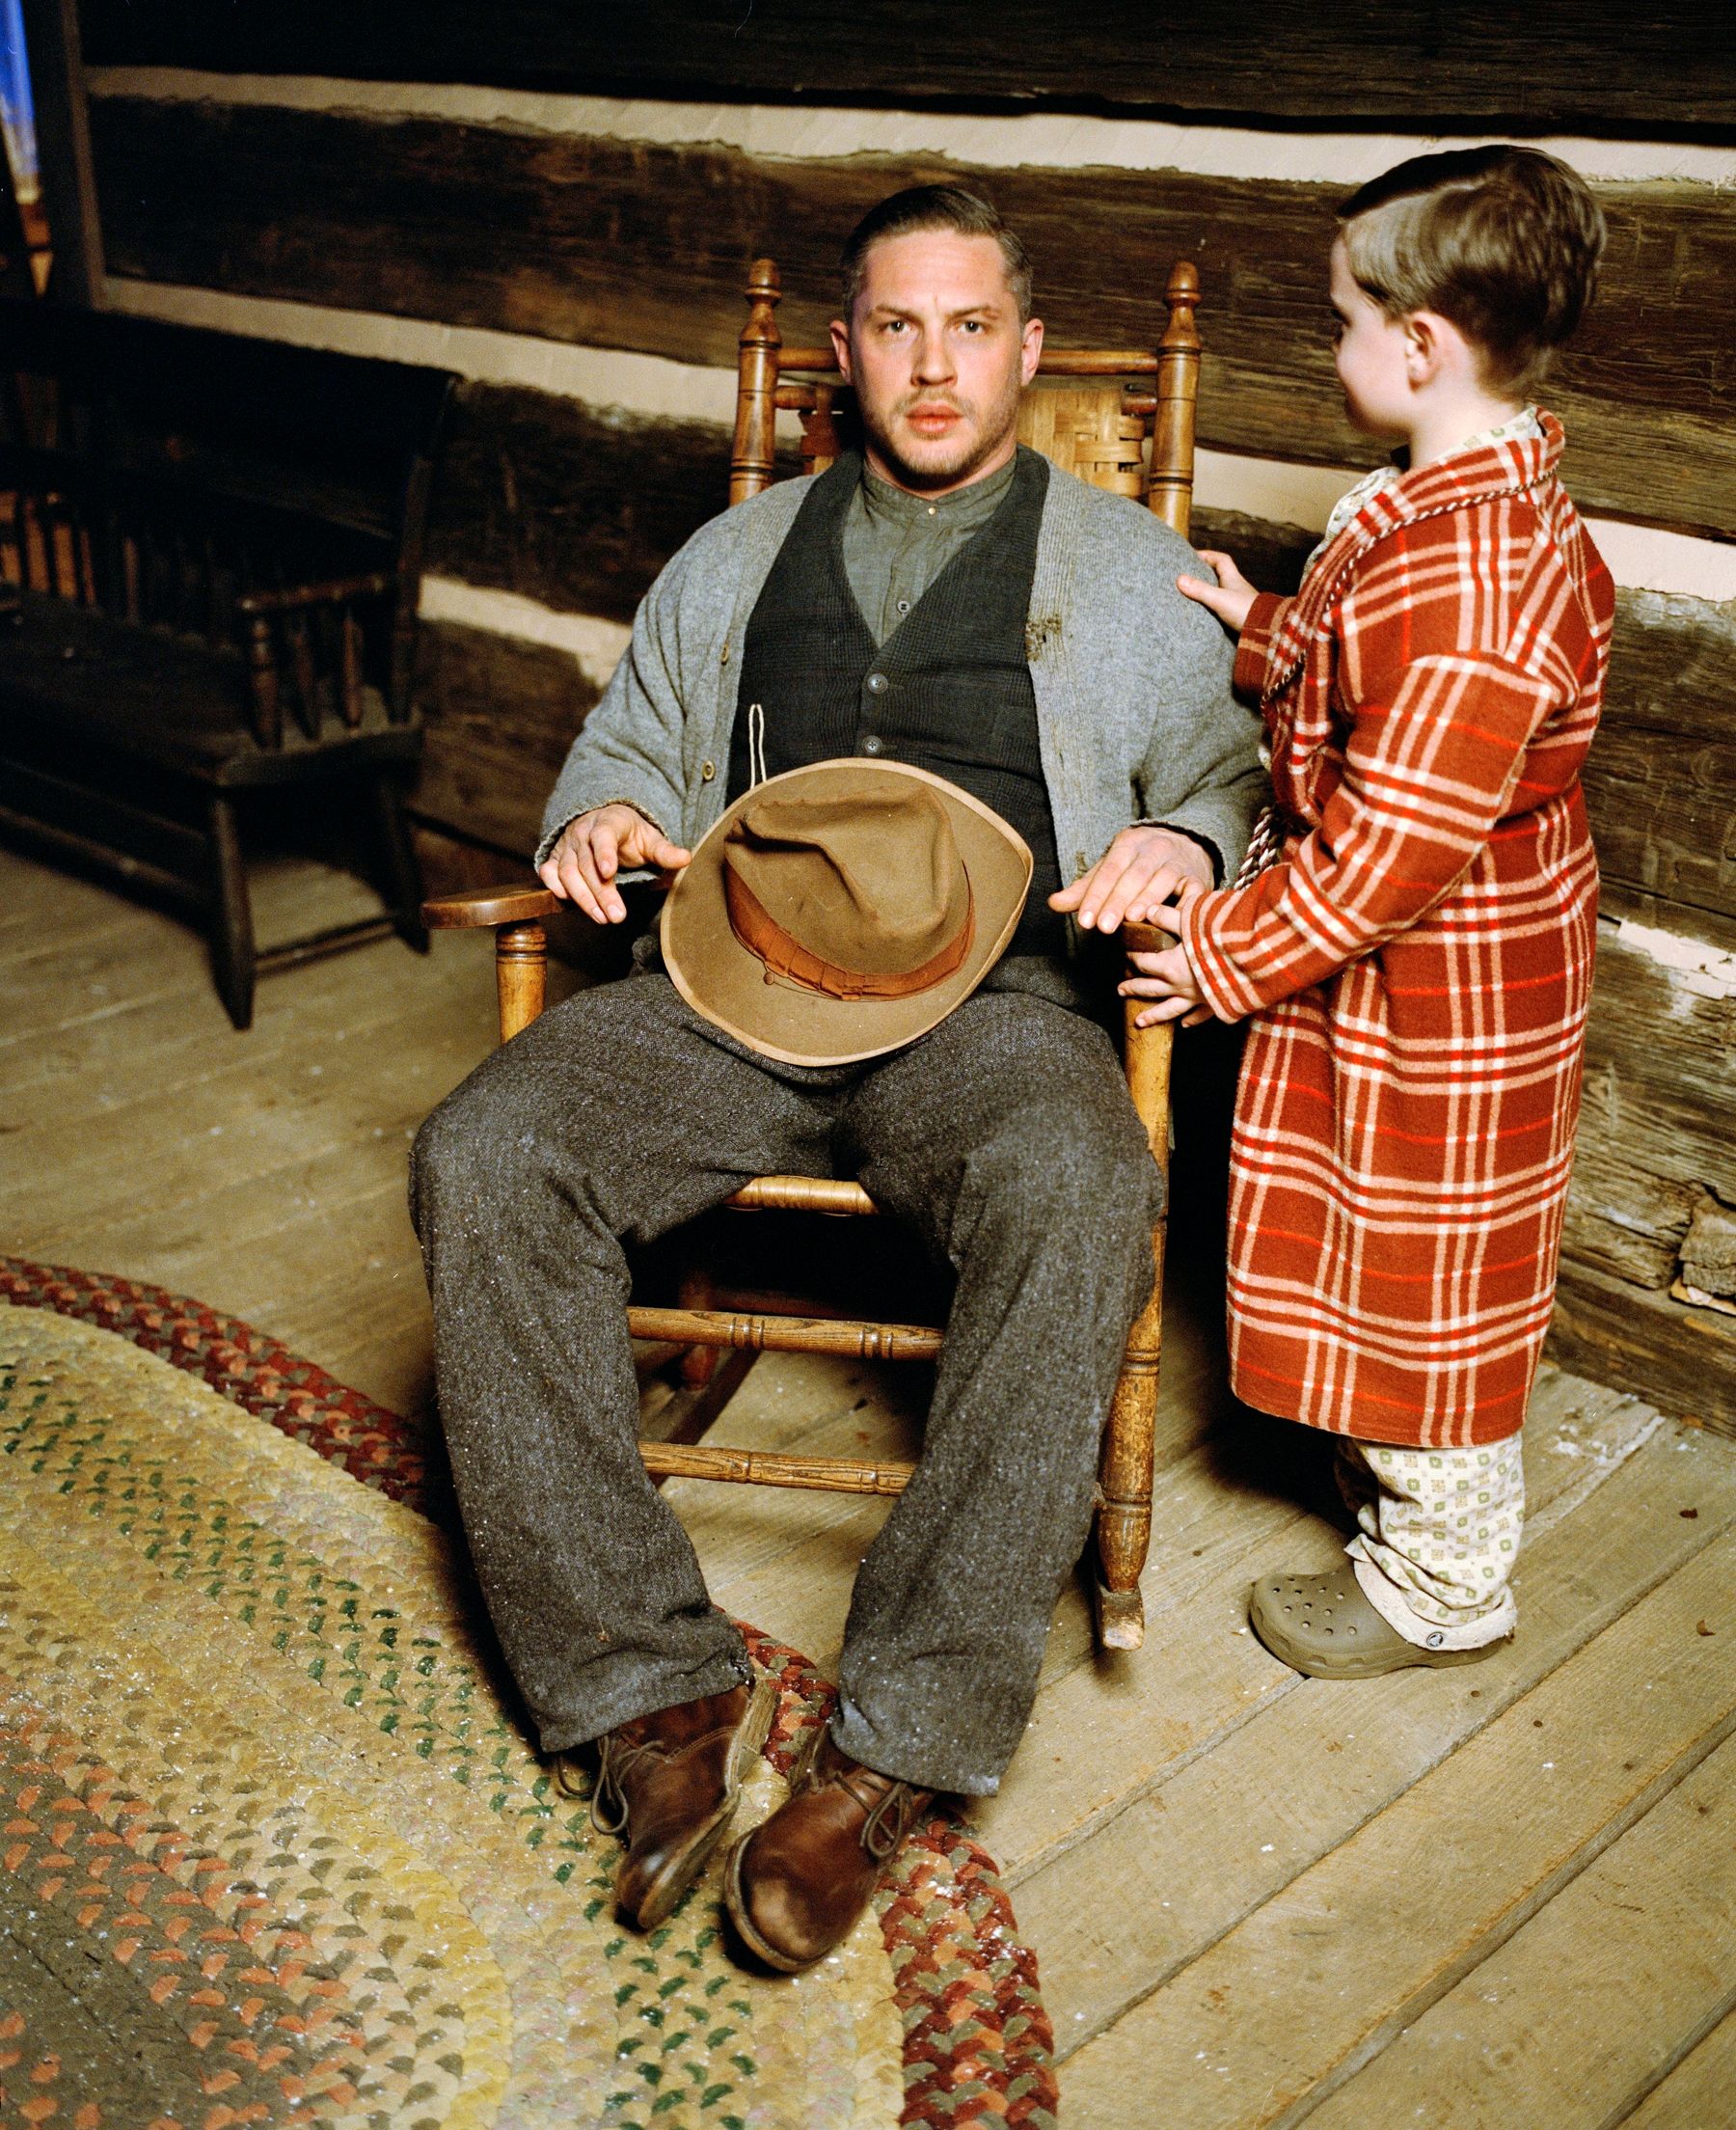 LAWLESS Photos Feature Shia LaBeouf, Tom Hardy, Jessica Chastain, More ...